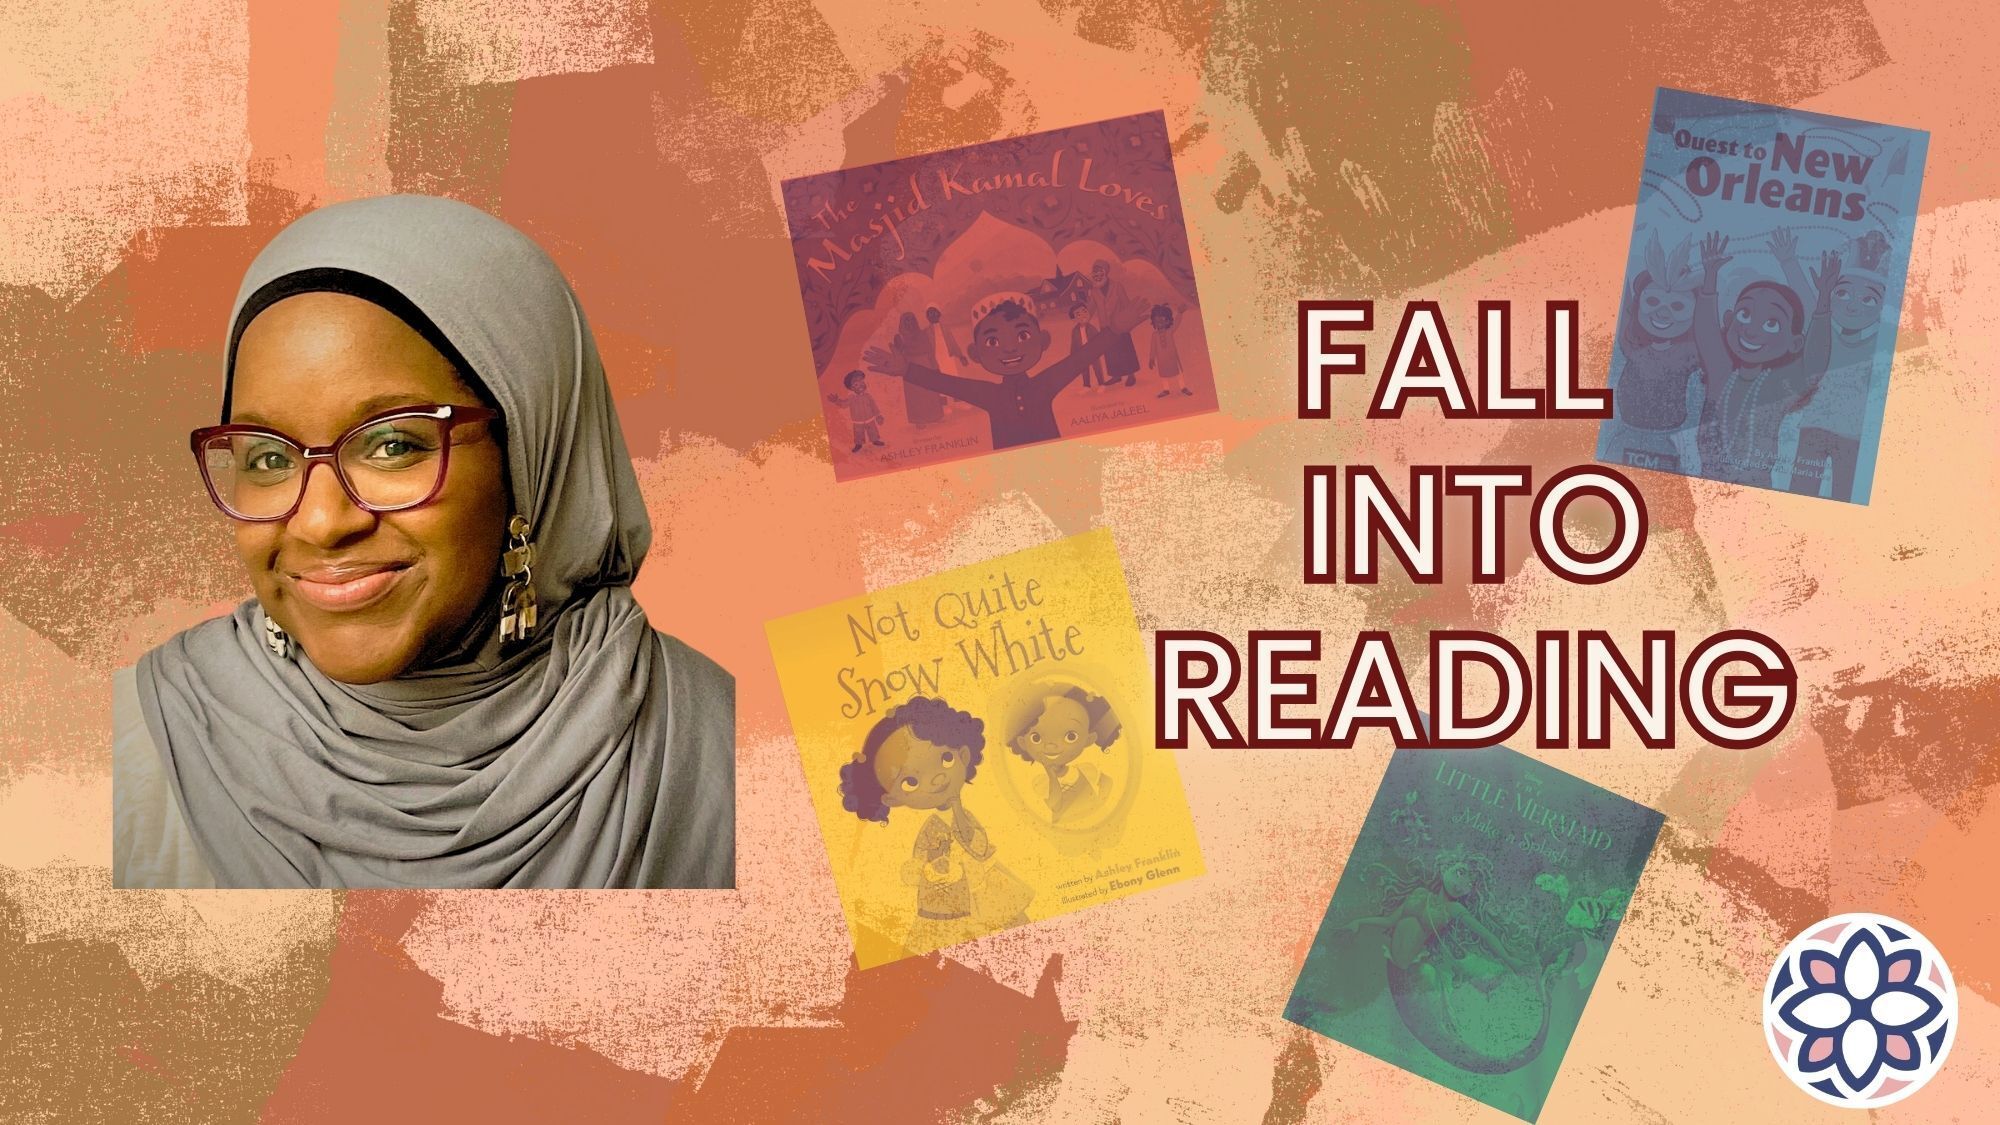 Ashley Franklin On “The Masjid Kamal Loves” and the Staying Power of Princess Stories